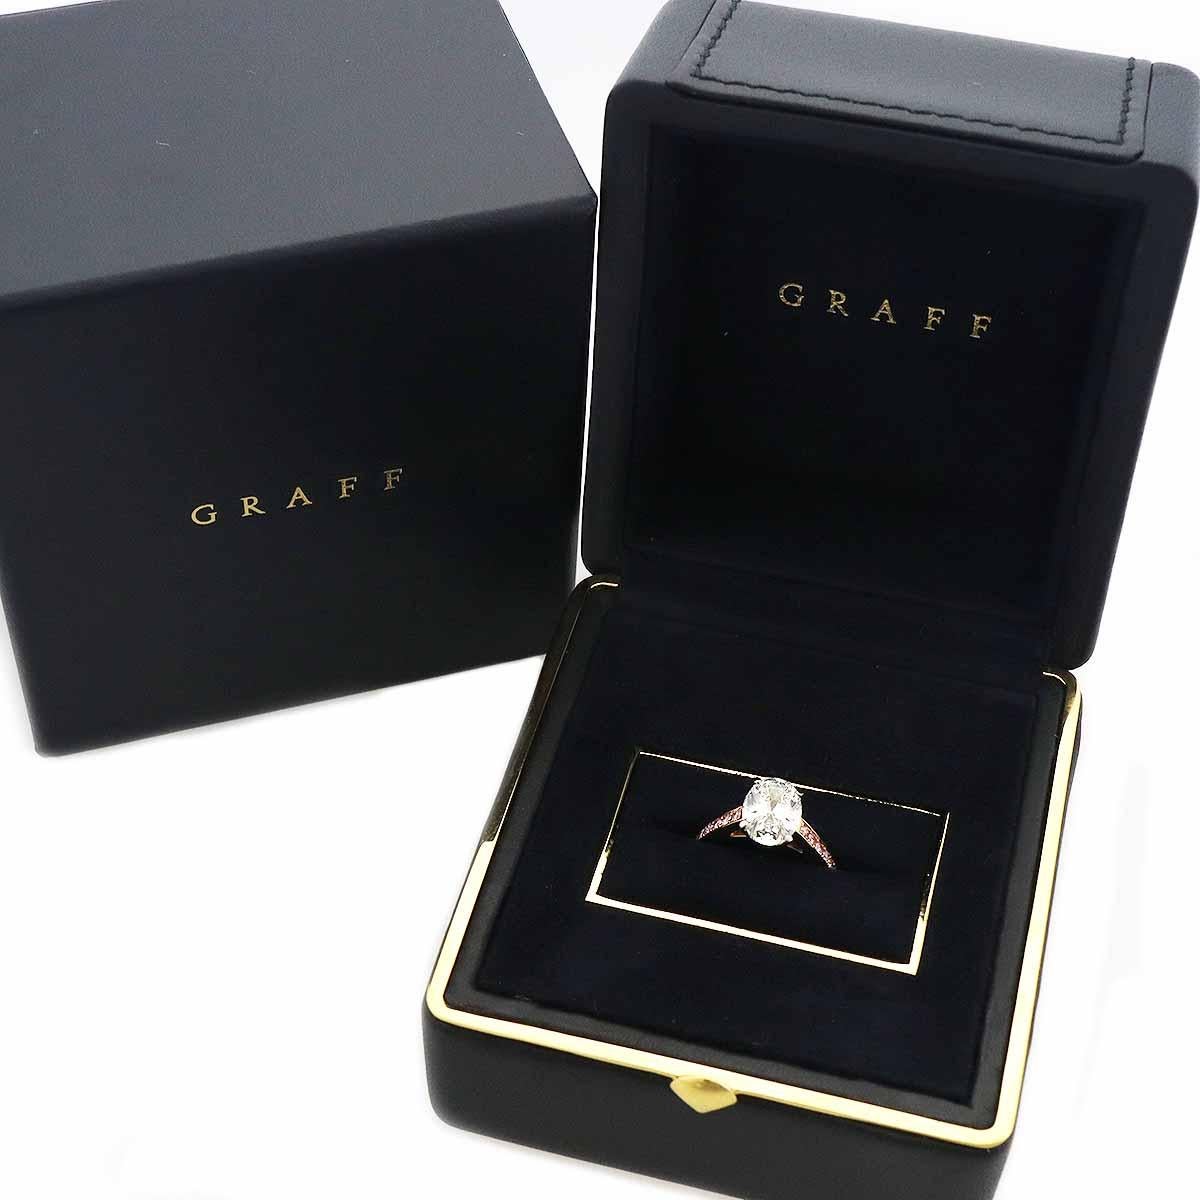 Brand:GRAFF
Name:Frame oval cut diamond ring
Material:1P Oval Cut Diamond 1P (2.02ct G-IF), Pink Diamond（0.36ct）, 
PT950 Platinum, 750 K18 PG Pink Gold
Weight:4.1g（Approx)
Ring size(inch):British & Australian:H 1/2  /   US & Canada:4 1/4 /  French &